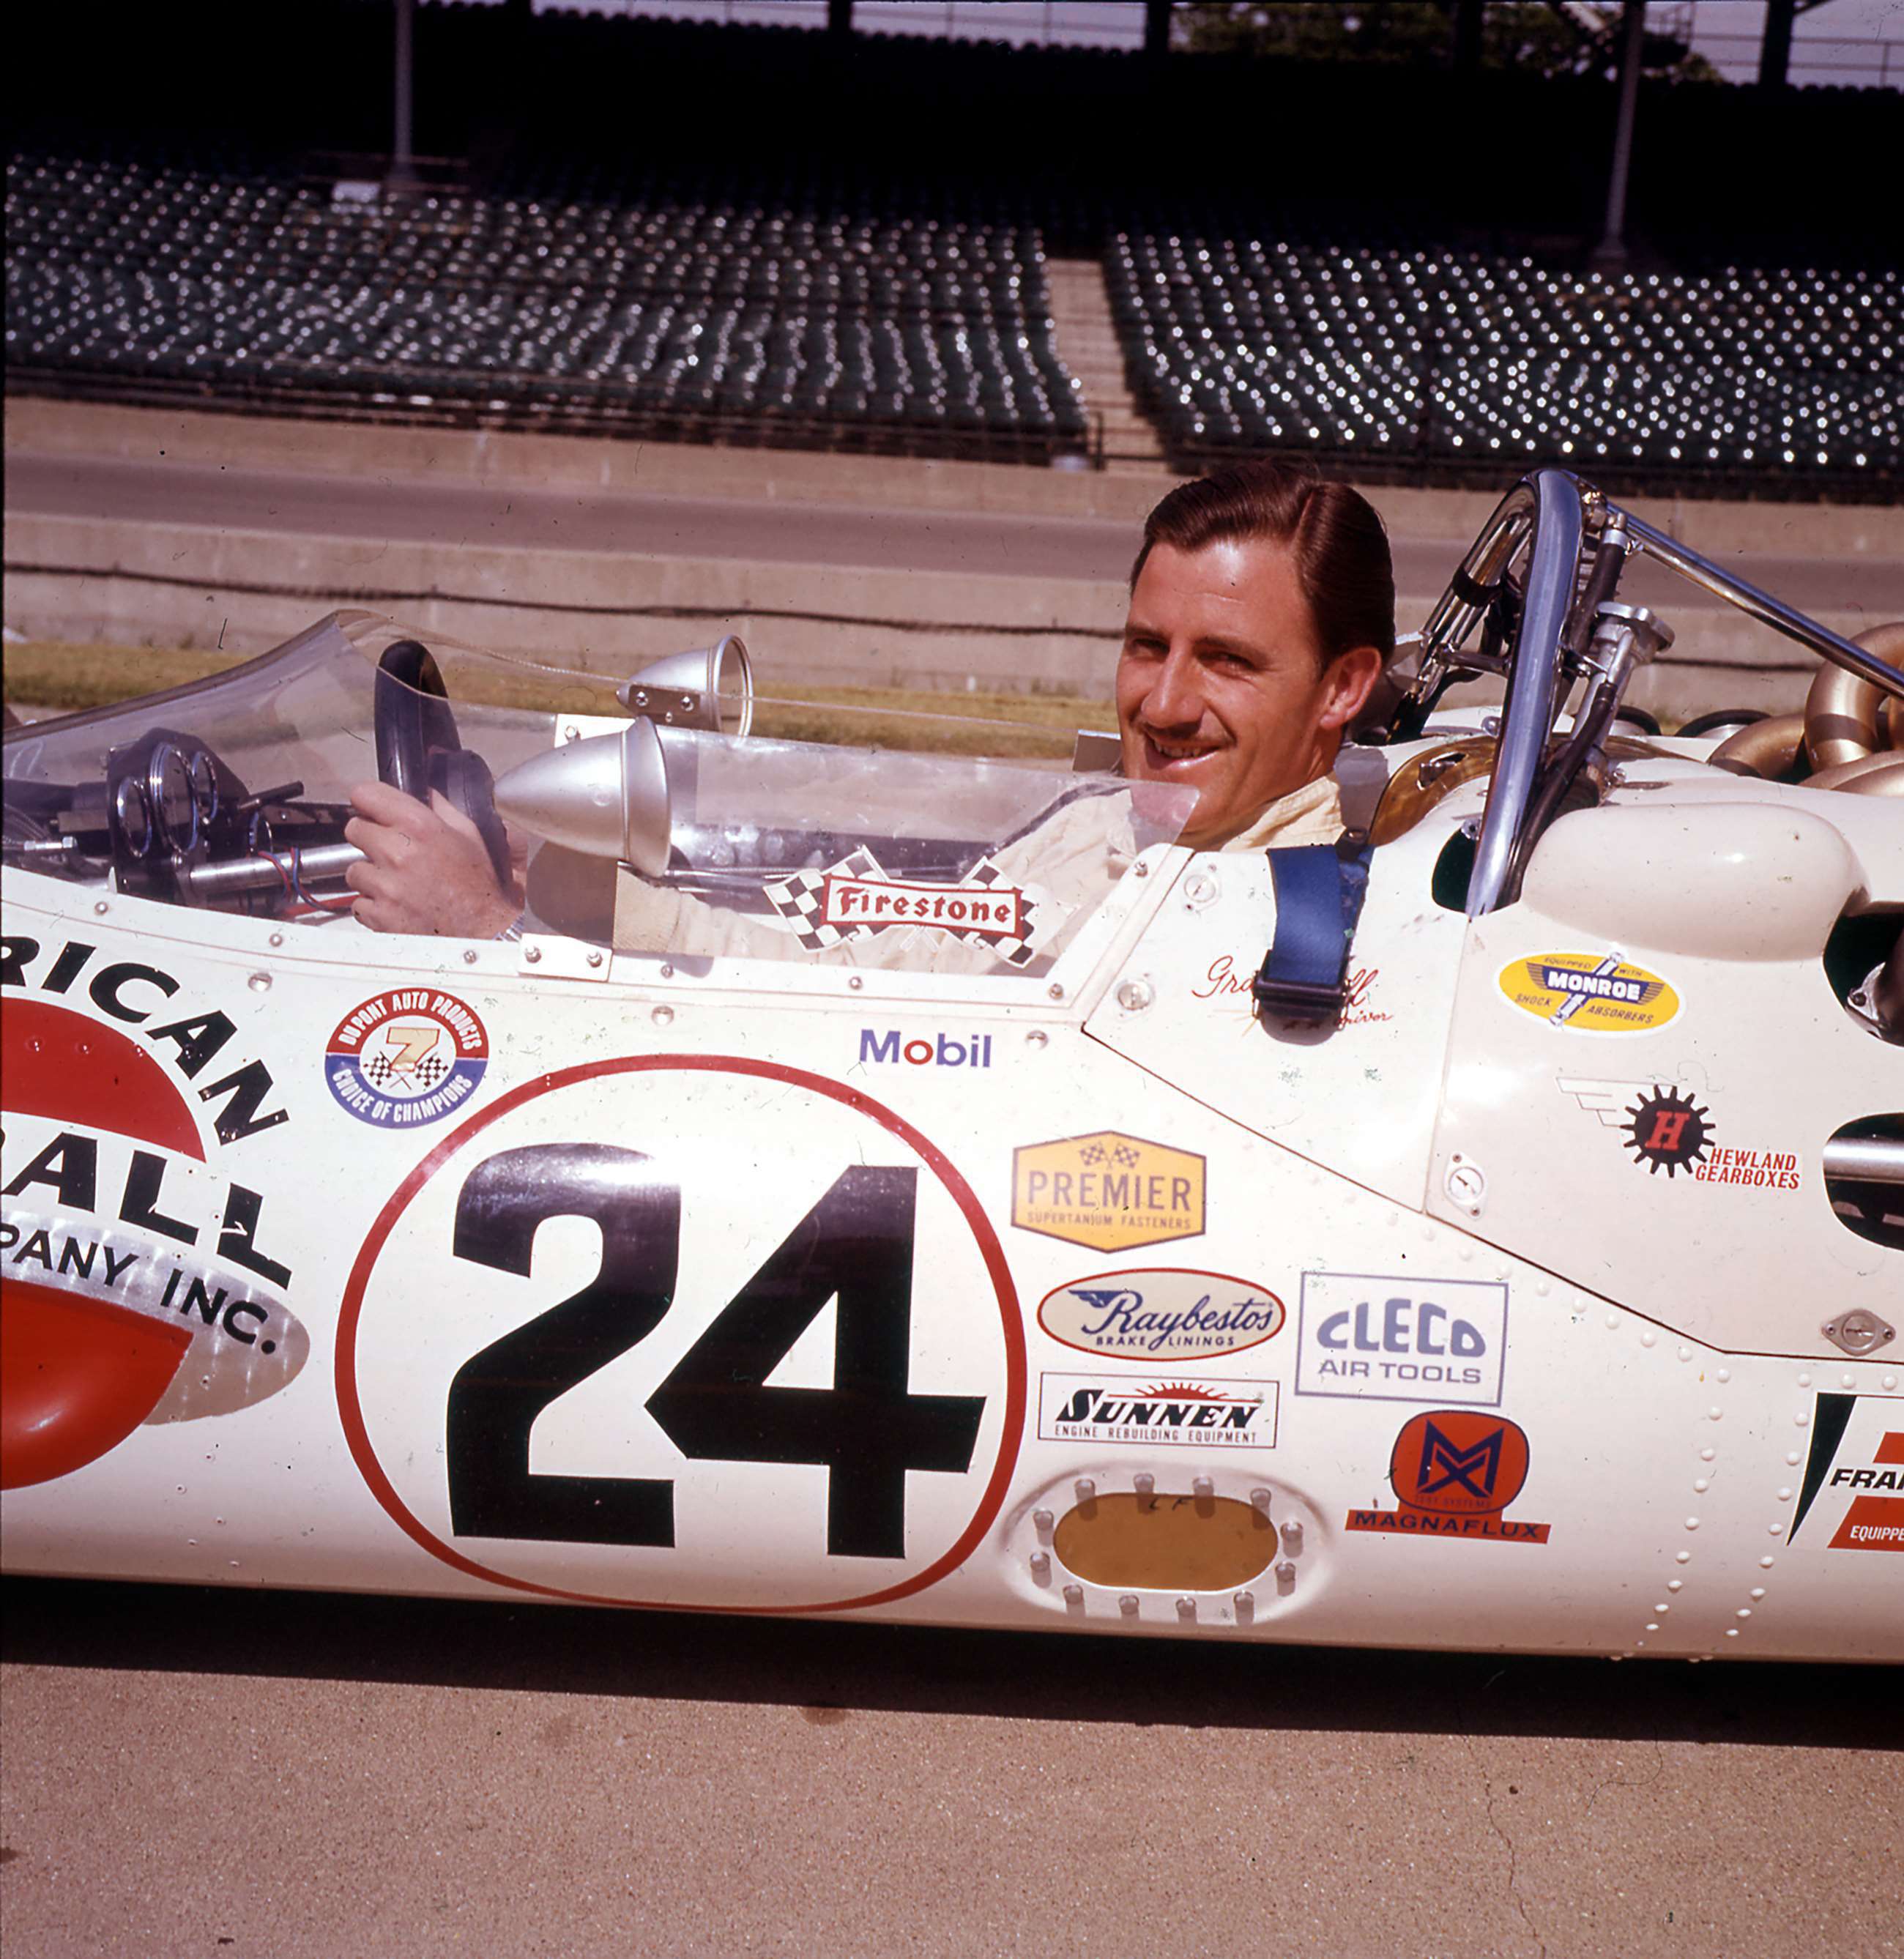 1962 World Champion Graham Hill in his 1966 Indianapolis 500-Miles-winning Lola-Ford T90 at ‘The Brickyard’.